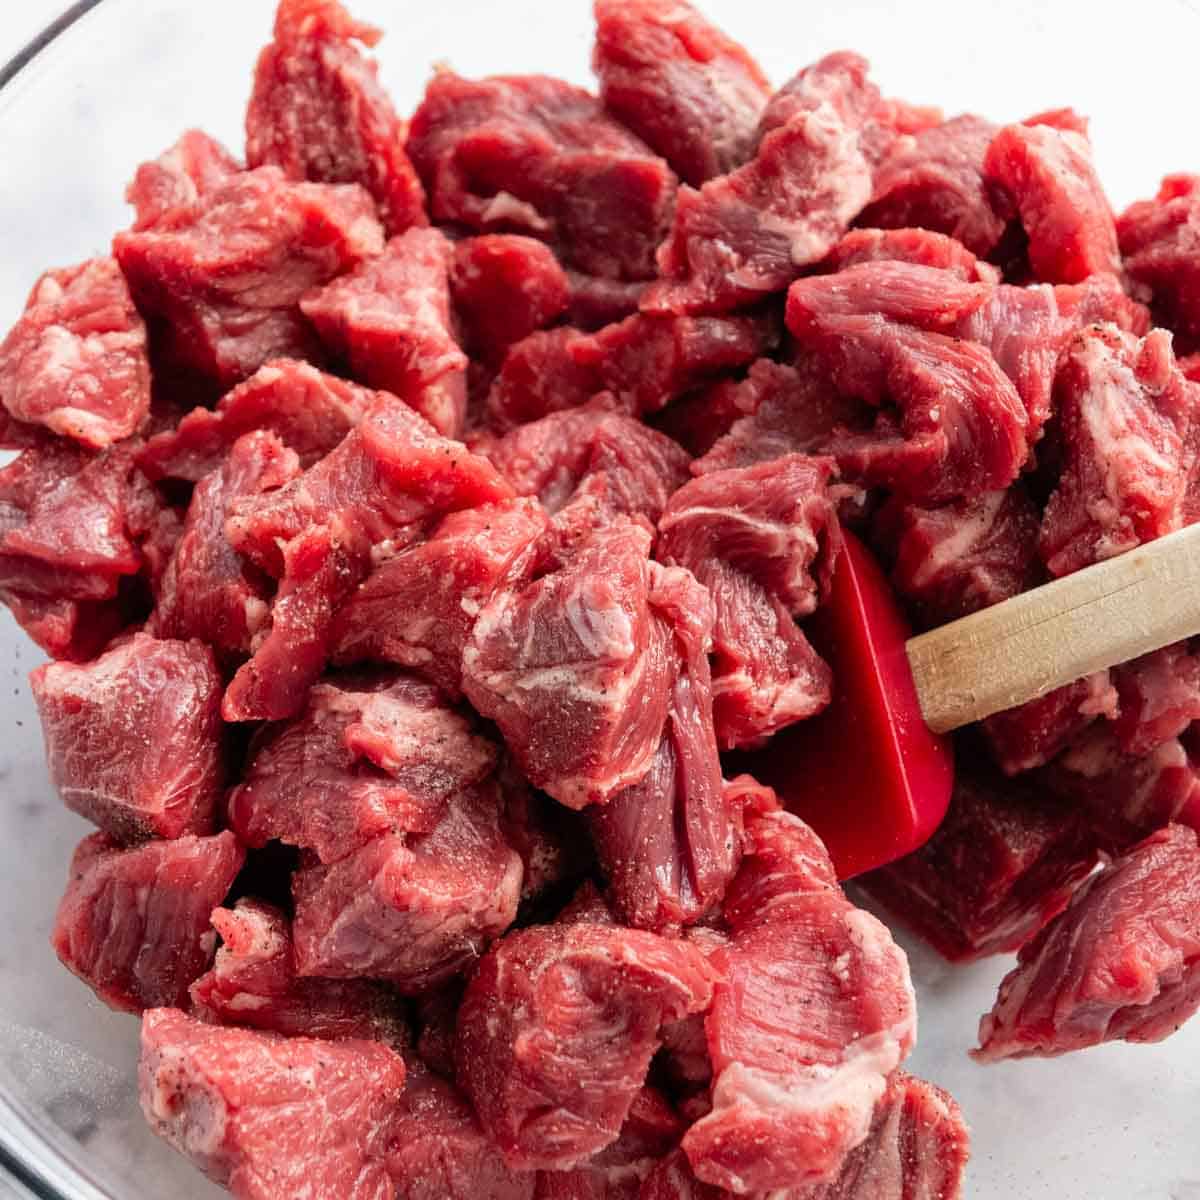 meat being stirred with salt and pepper in a bowl.